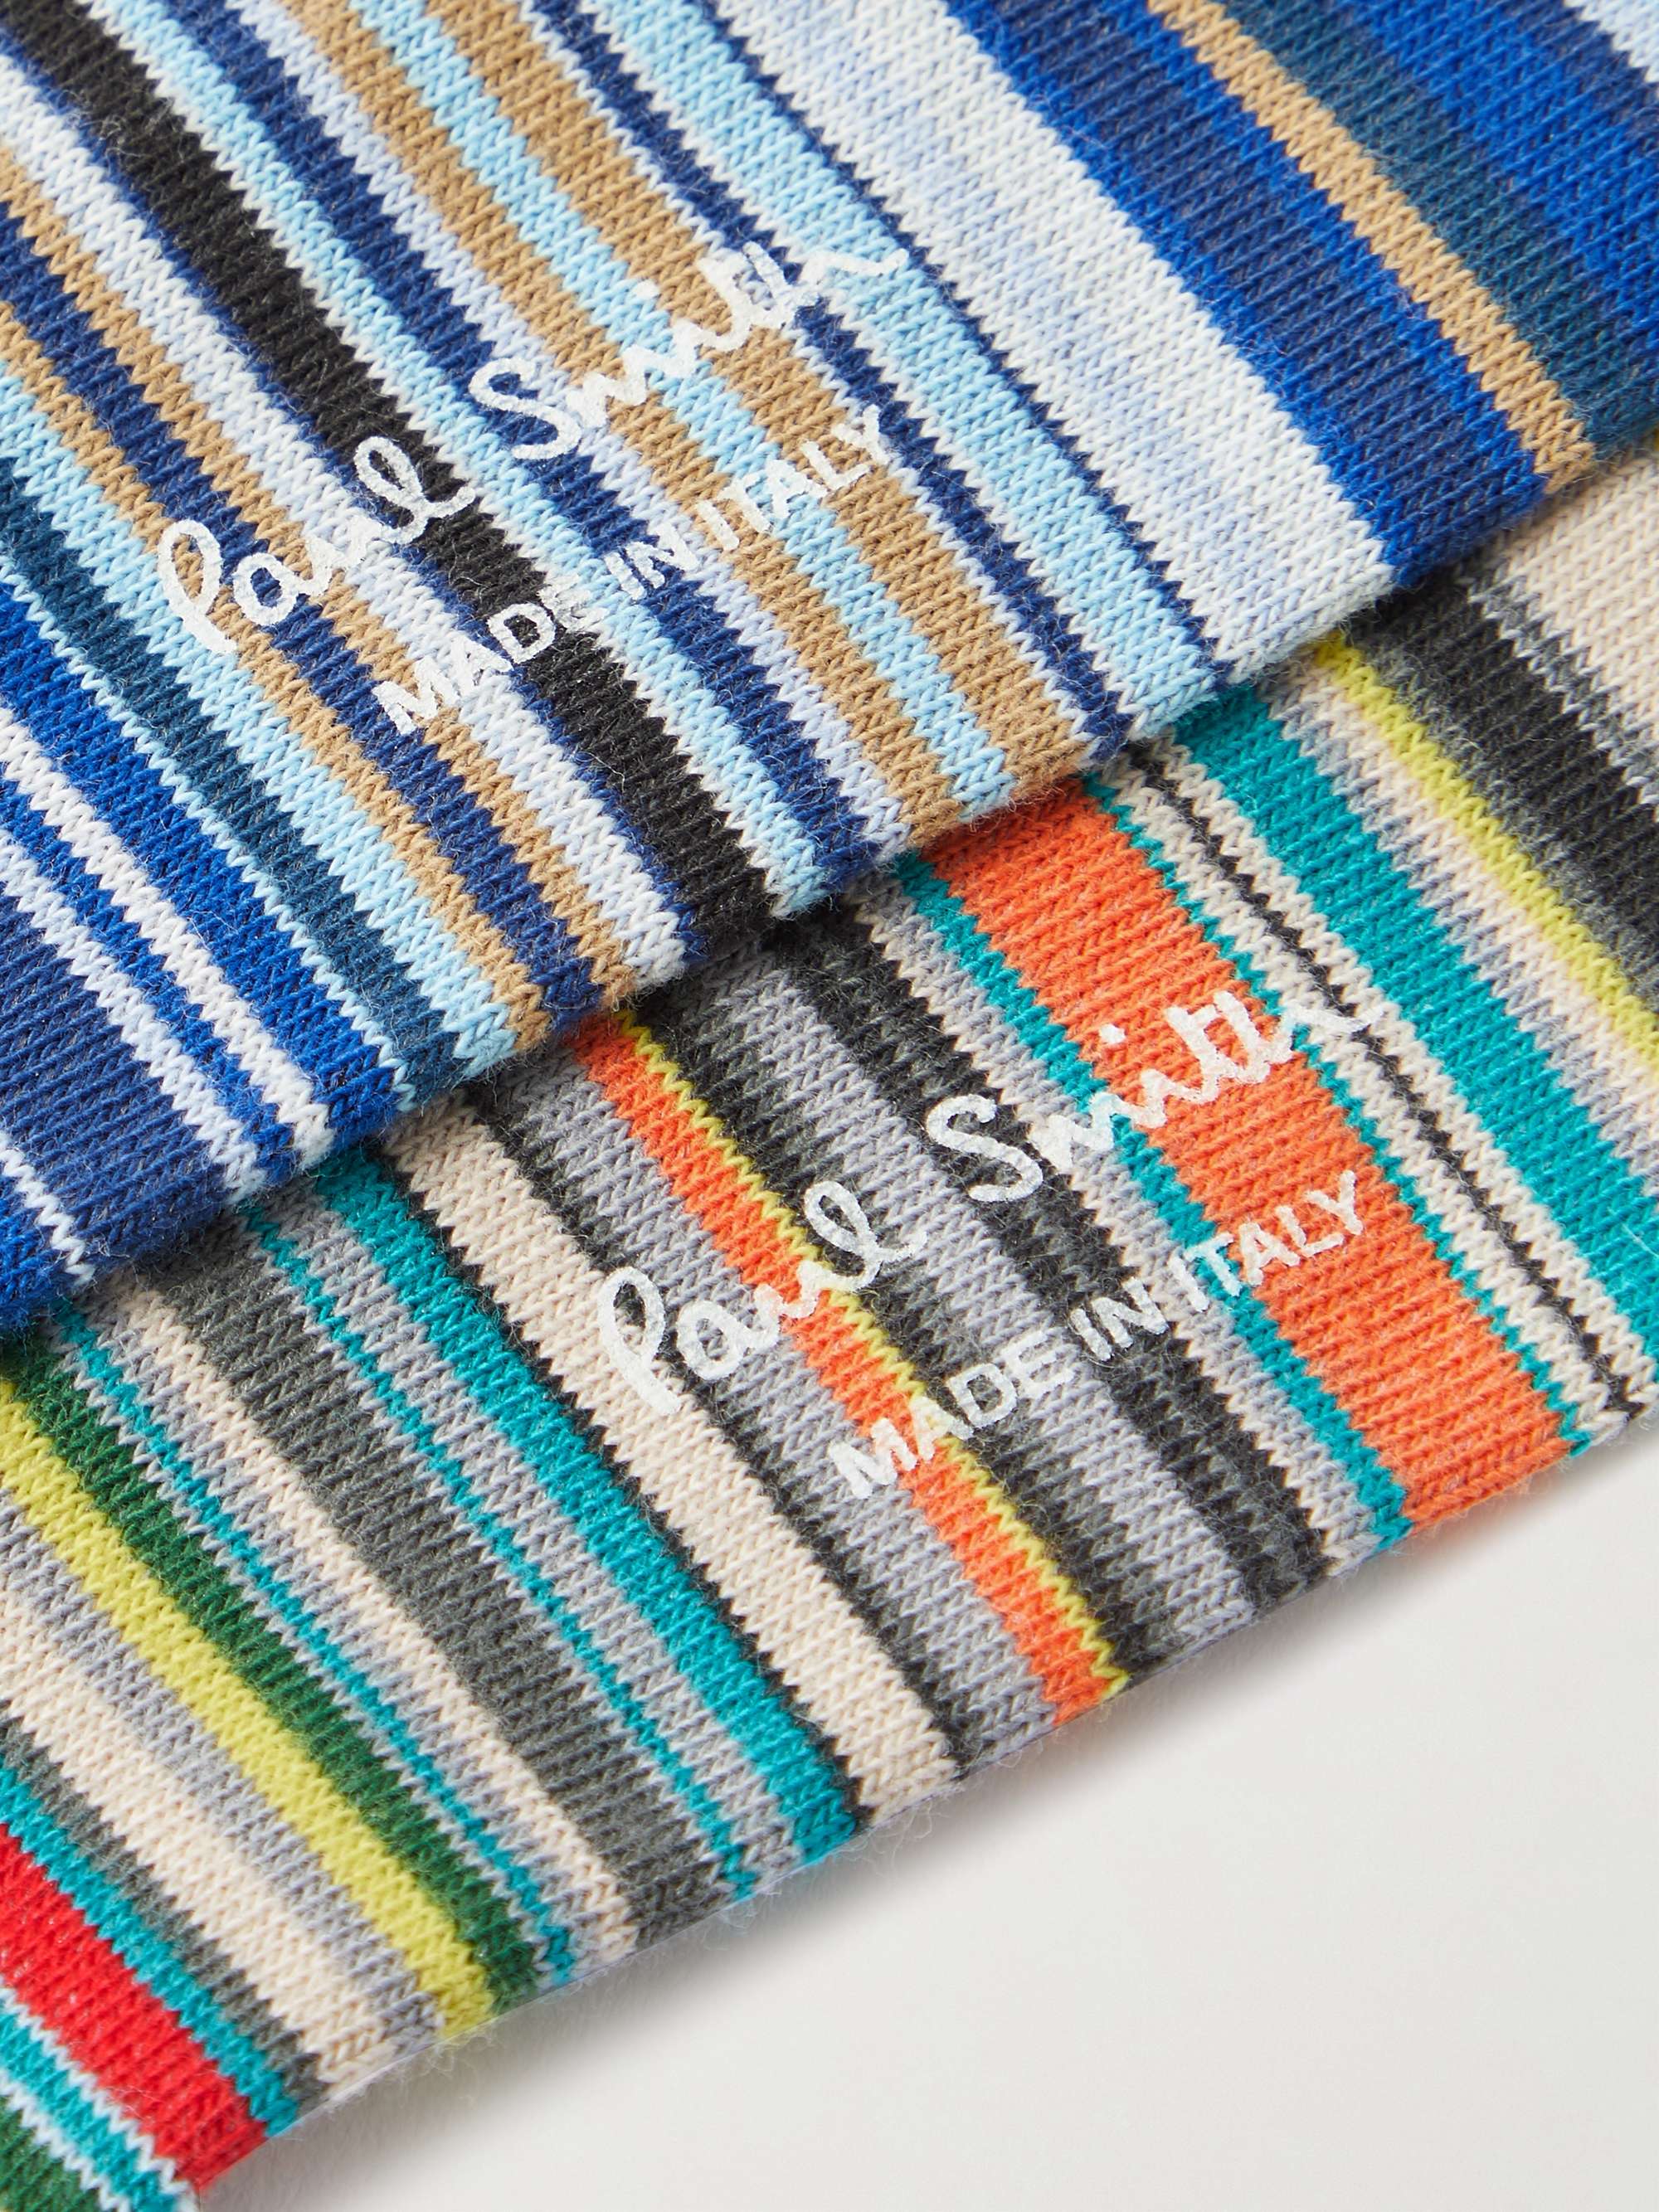 PAUL SMITH Two-Pack Striped Cotton-Blend Socks